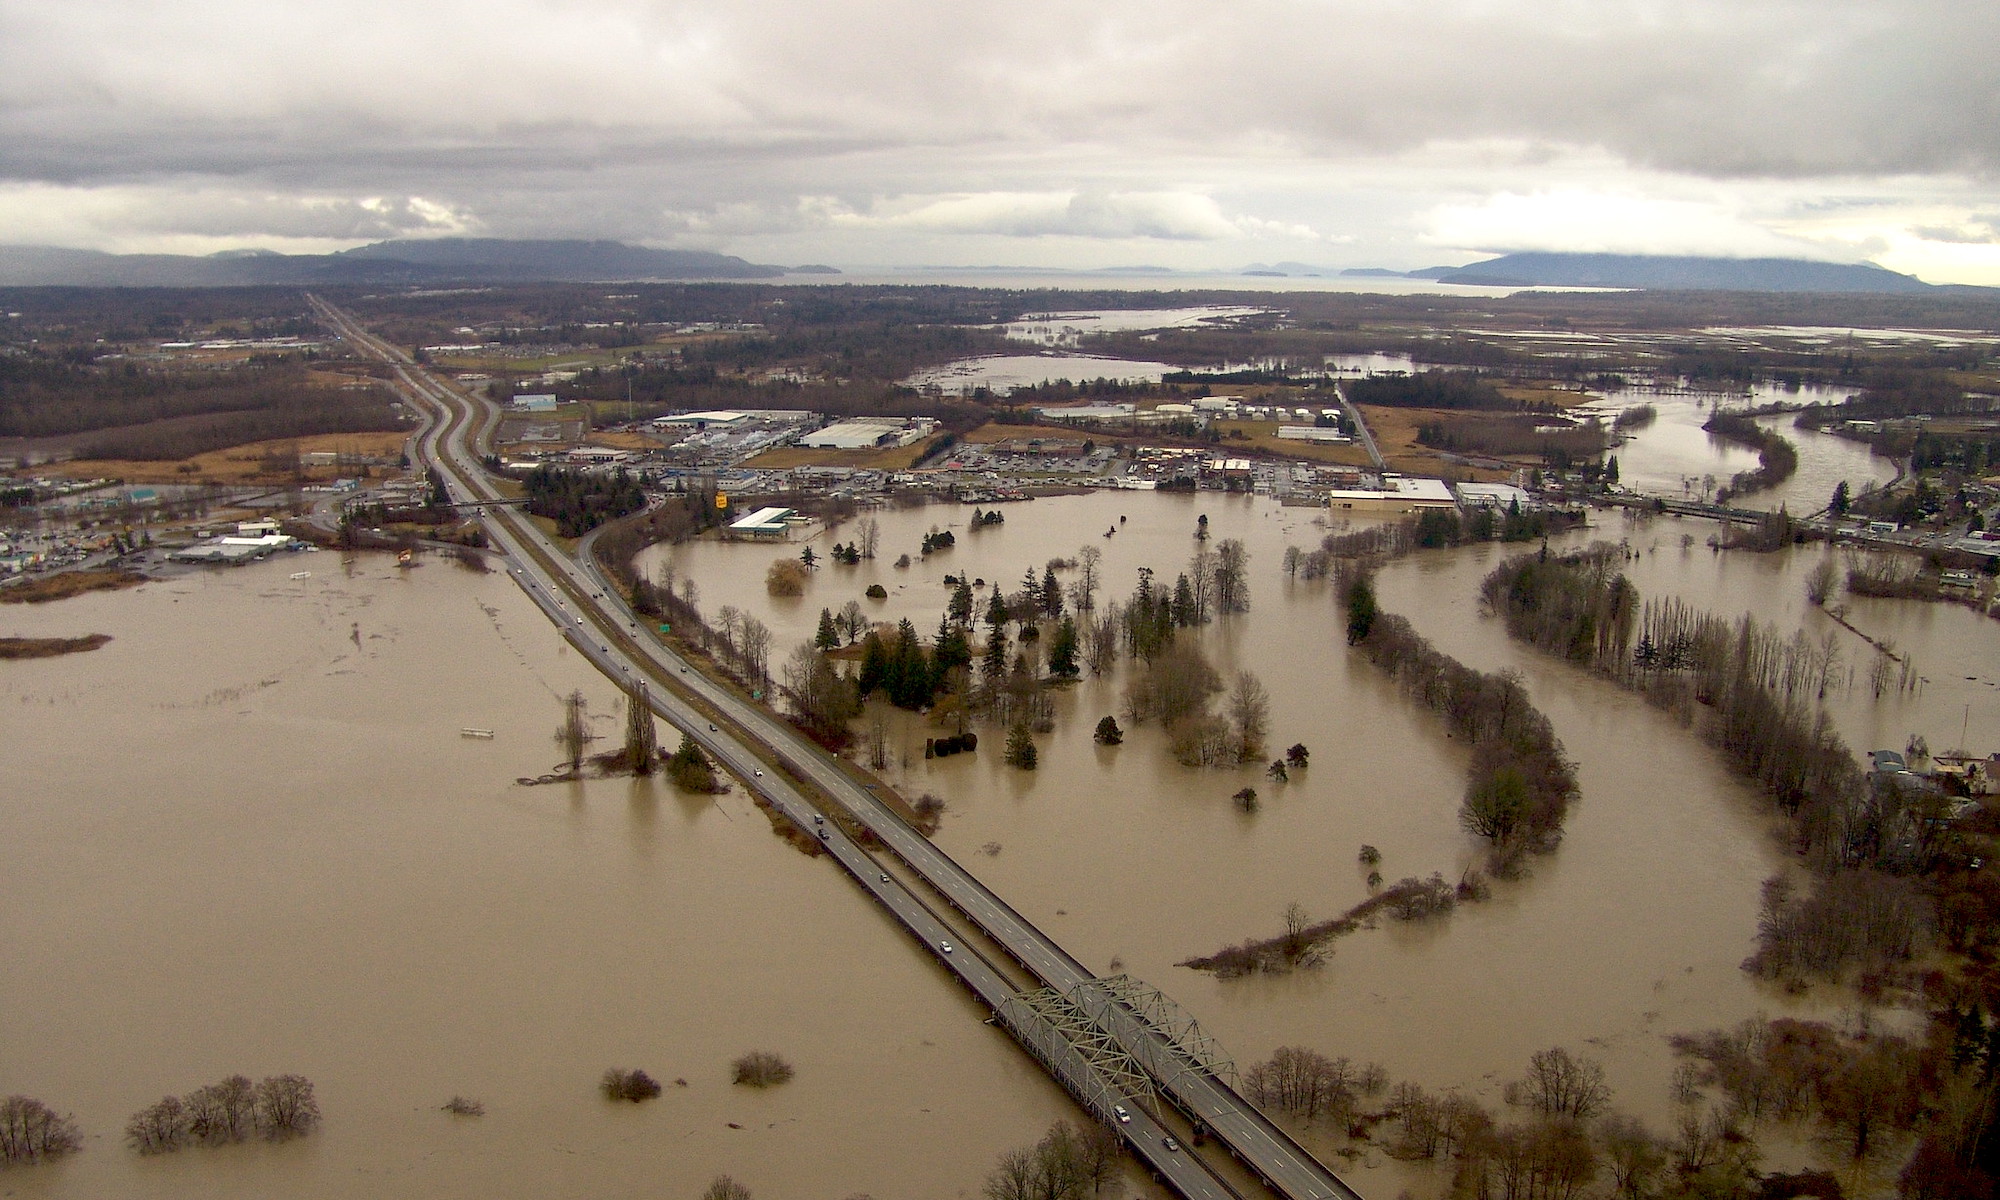 							Aerial view of Interstate 5 stretching across a large area of land covered by brown flood waters from the Nooksack River in the foreground with mountains and Puget Sound in the distance and grey skies above.							